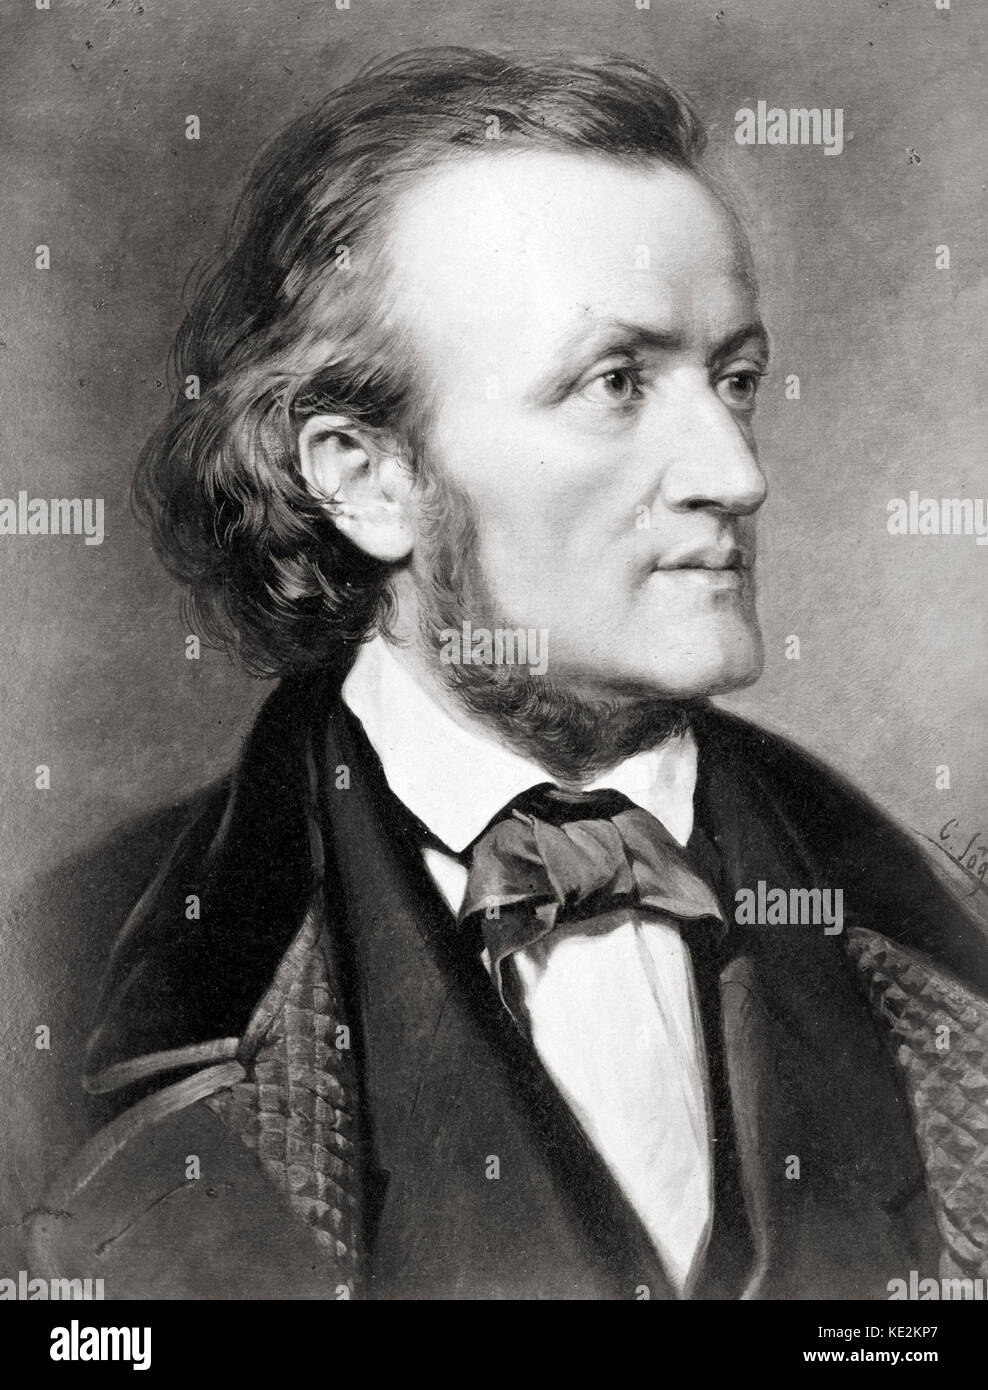 Richard Wagner - portrait of the German composer & author by G. Jager. 22 May 1813 - 13 February 1883. Stock Photo